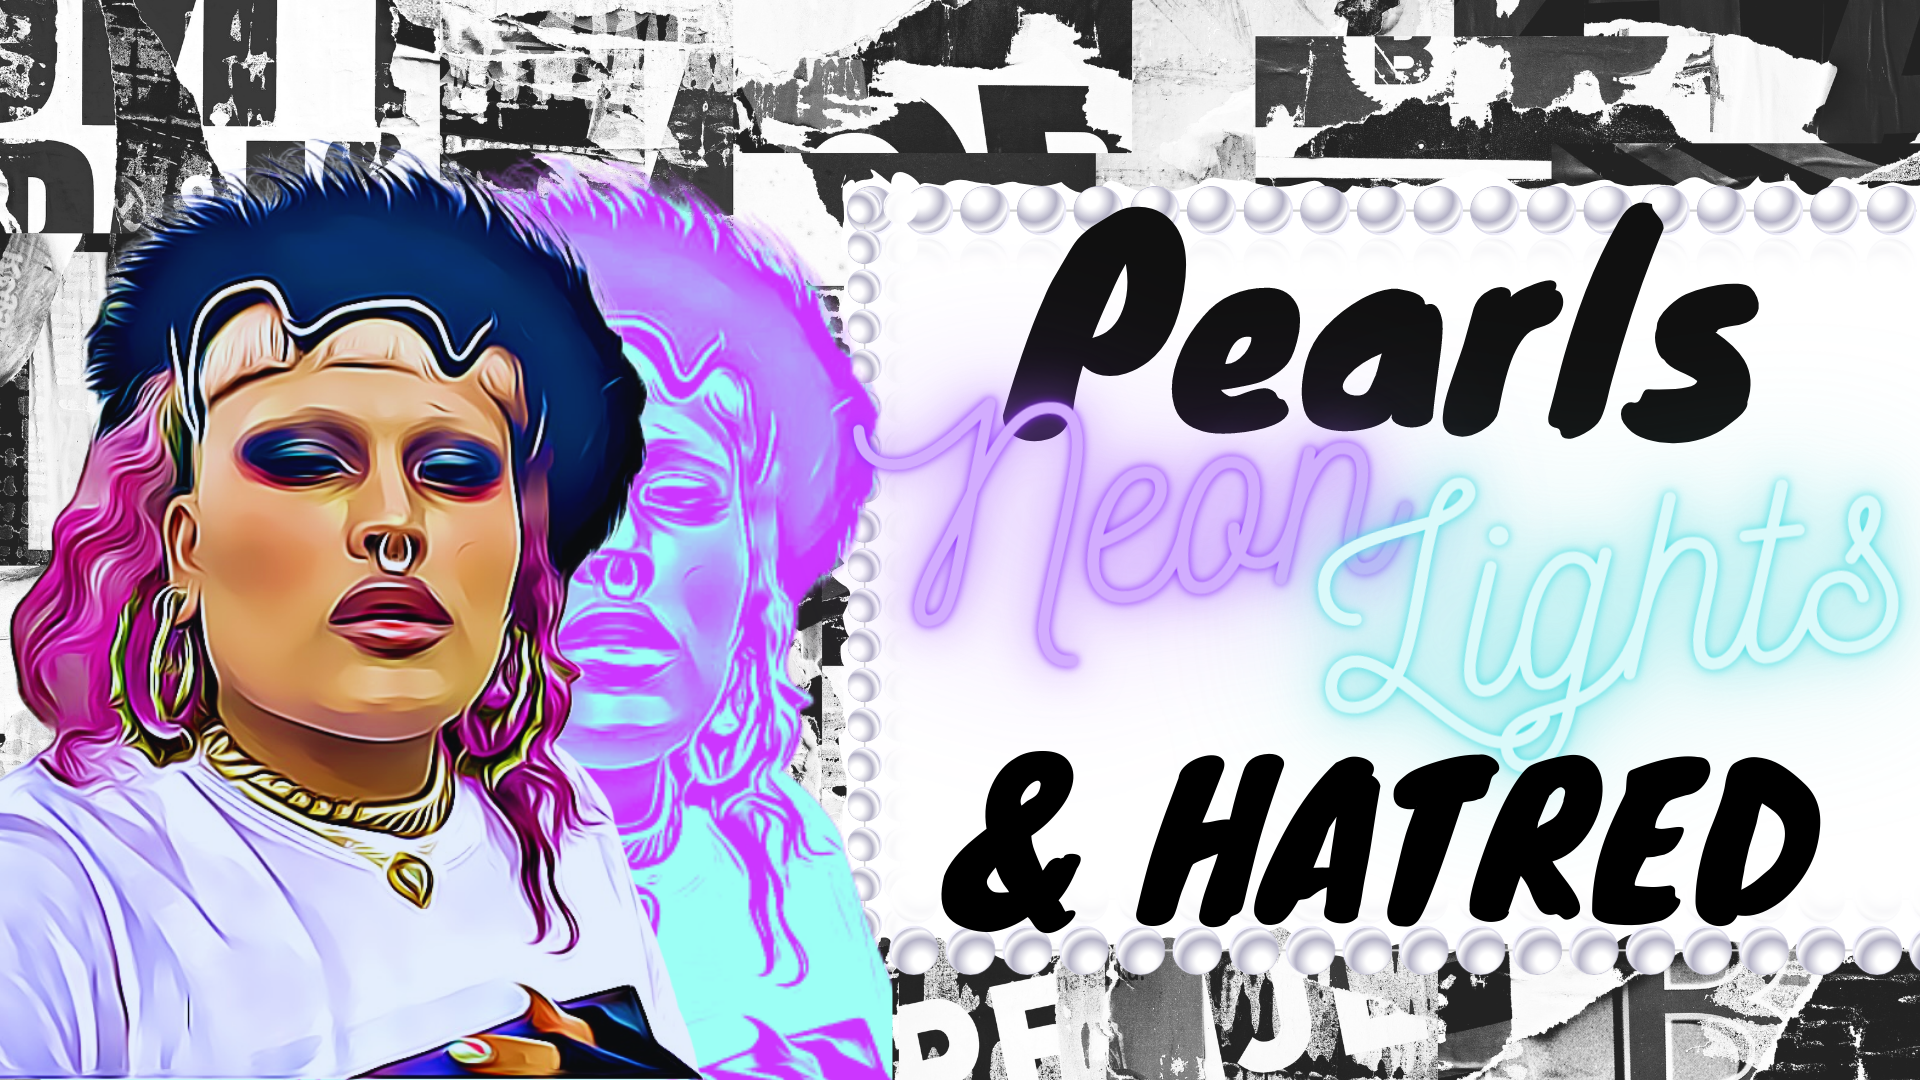 Pearls, Neon Lights and Hatred ; A vision of SYC